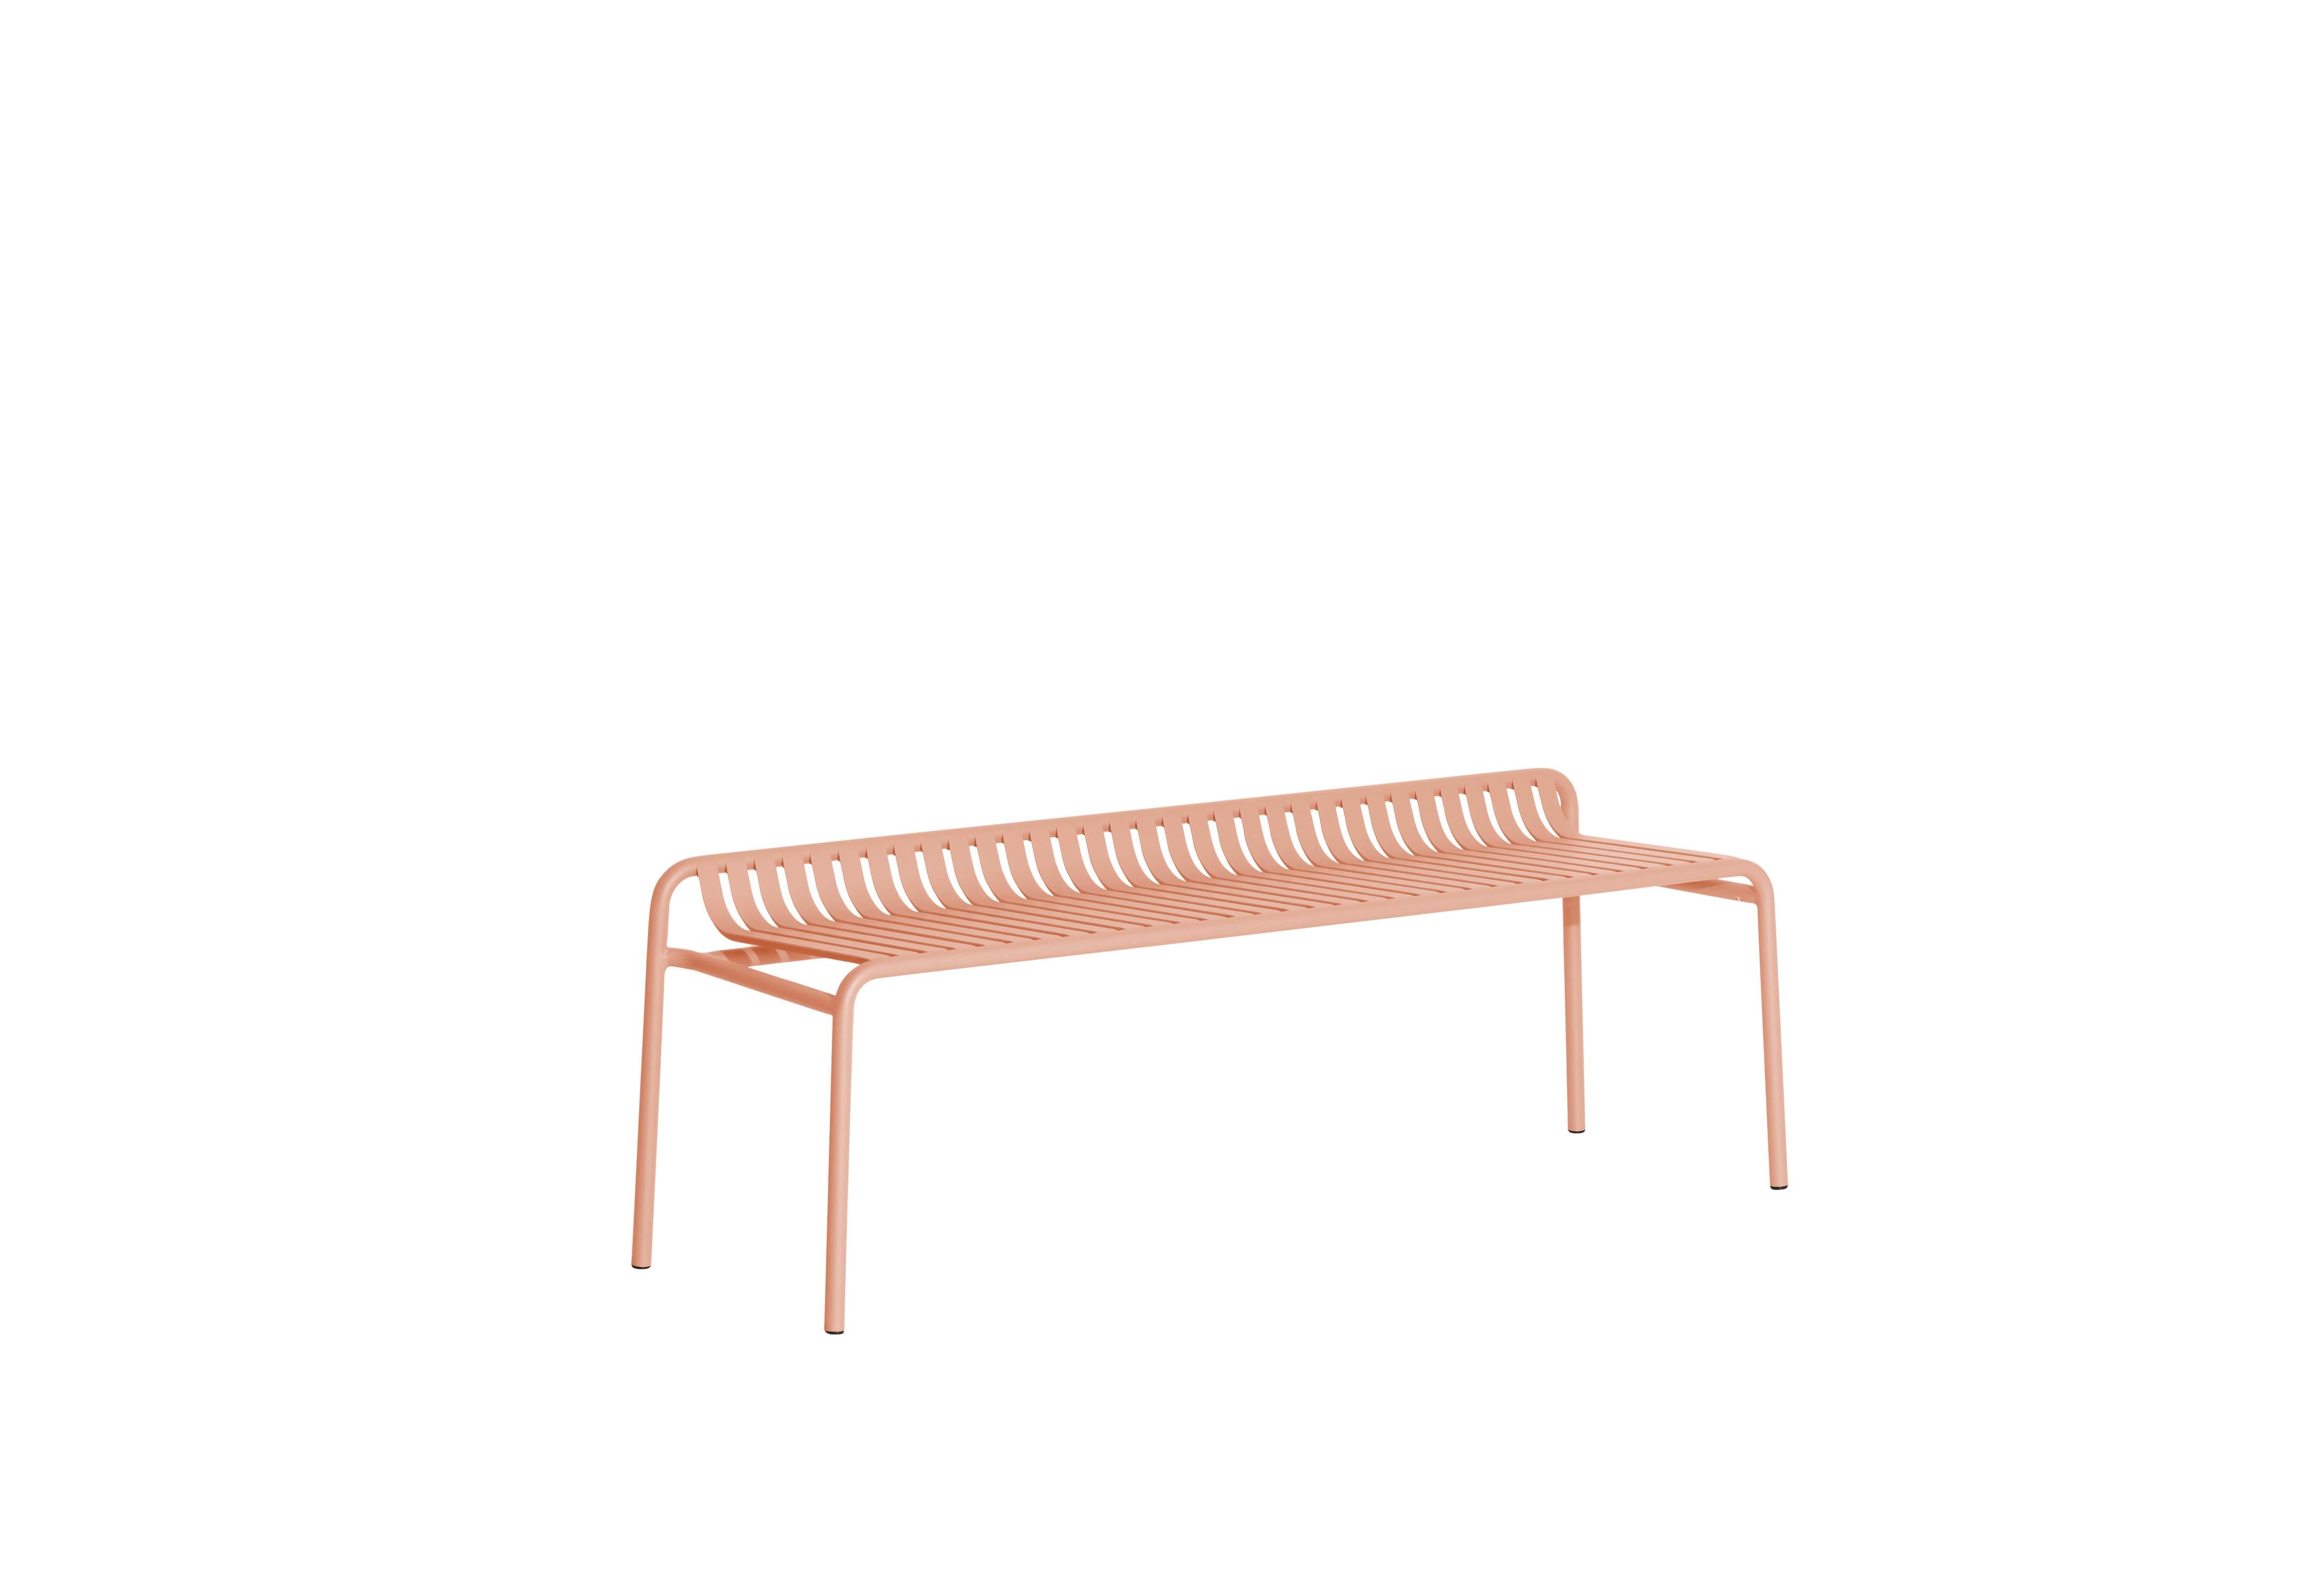 Petite Friture Week-End Bench without Back in Blush Aluminium by Studio BrichetZiegler, 2017

The week-end collection is a full range of outdoor furniture, in aluminium grained epoxy paint, matt finish, that includes 18 functions and 8 colours for